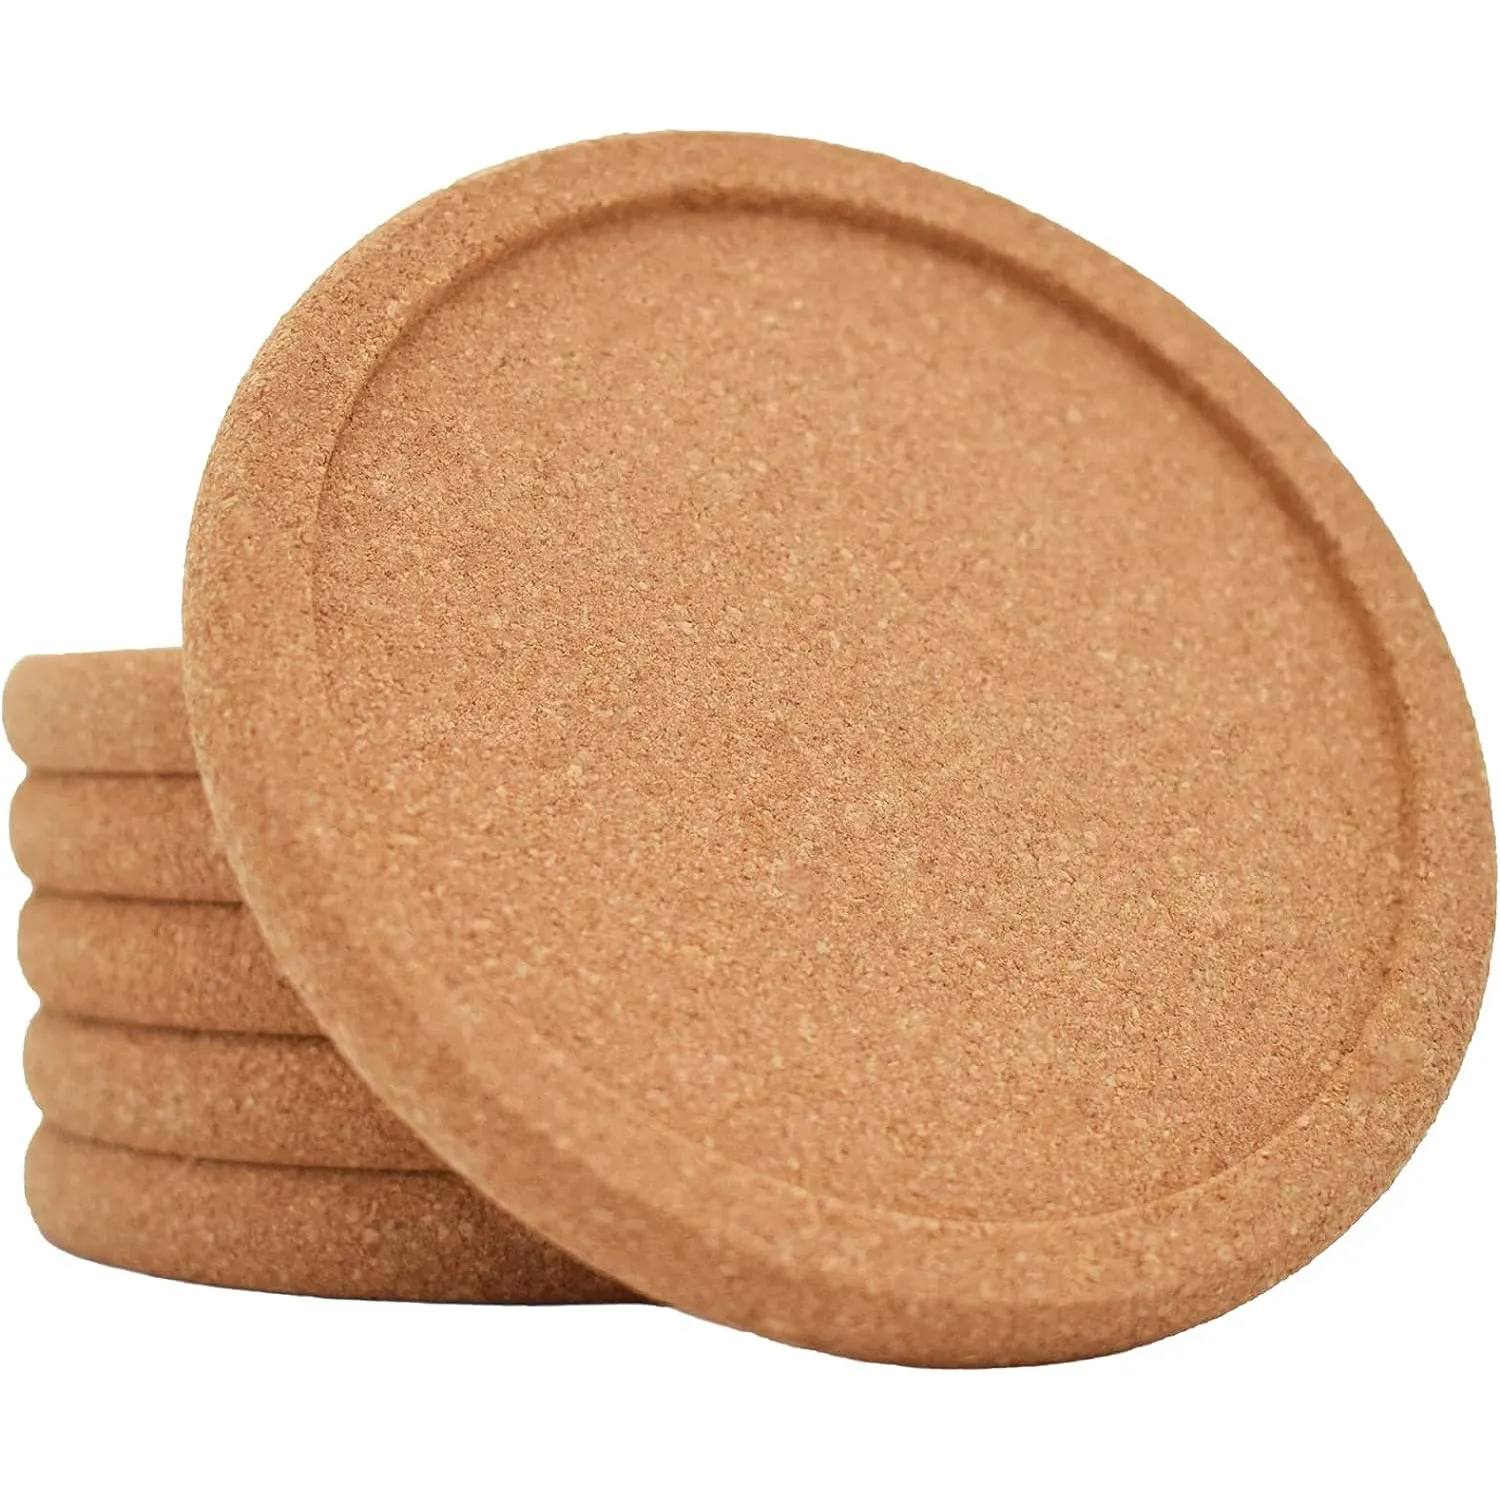 Tabletex Natural Round Cork Coasters With Metal Holder Set Of 8 Pcs 4 Inch Cold Drinks Wine Glasses Mugs Cups Cork Coaster